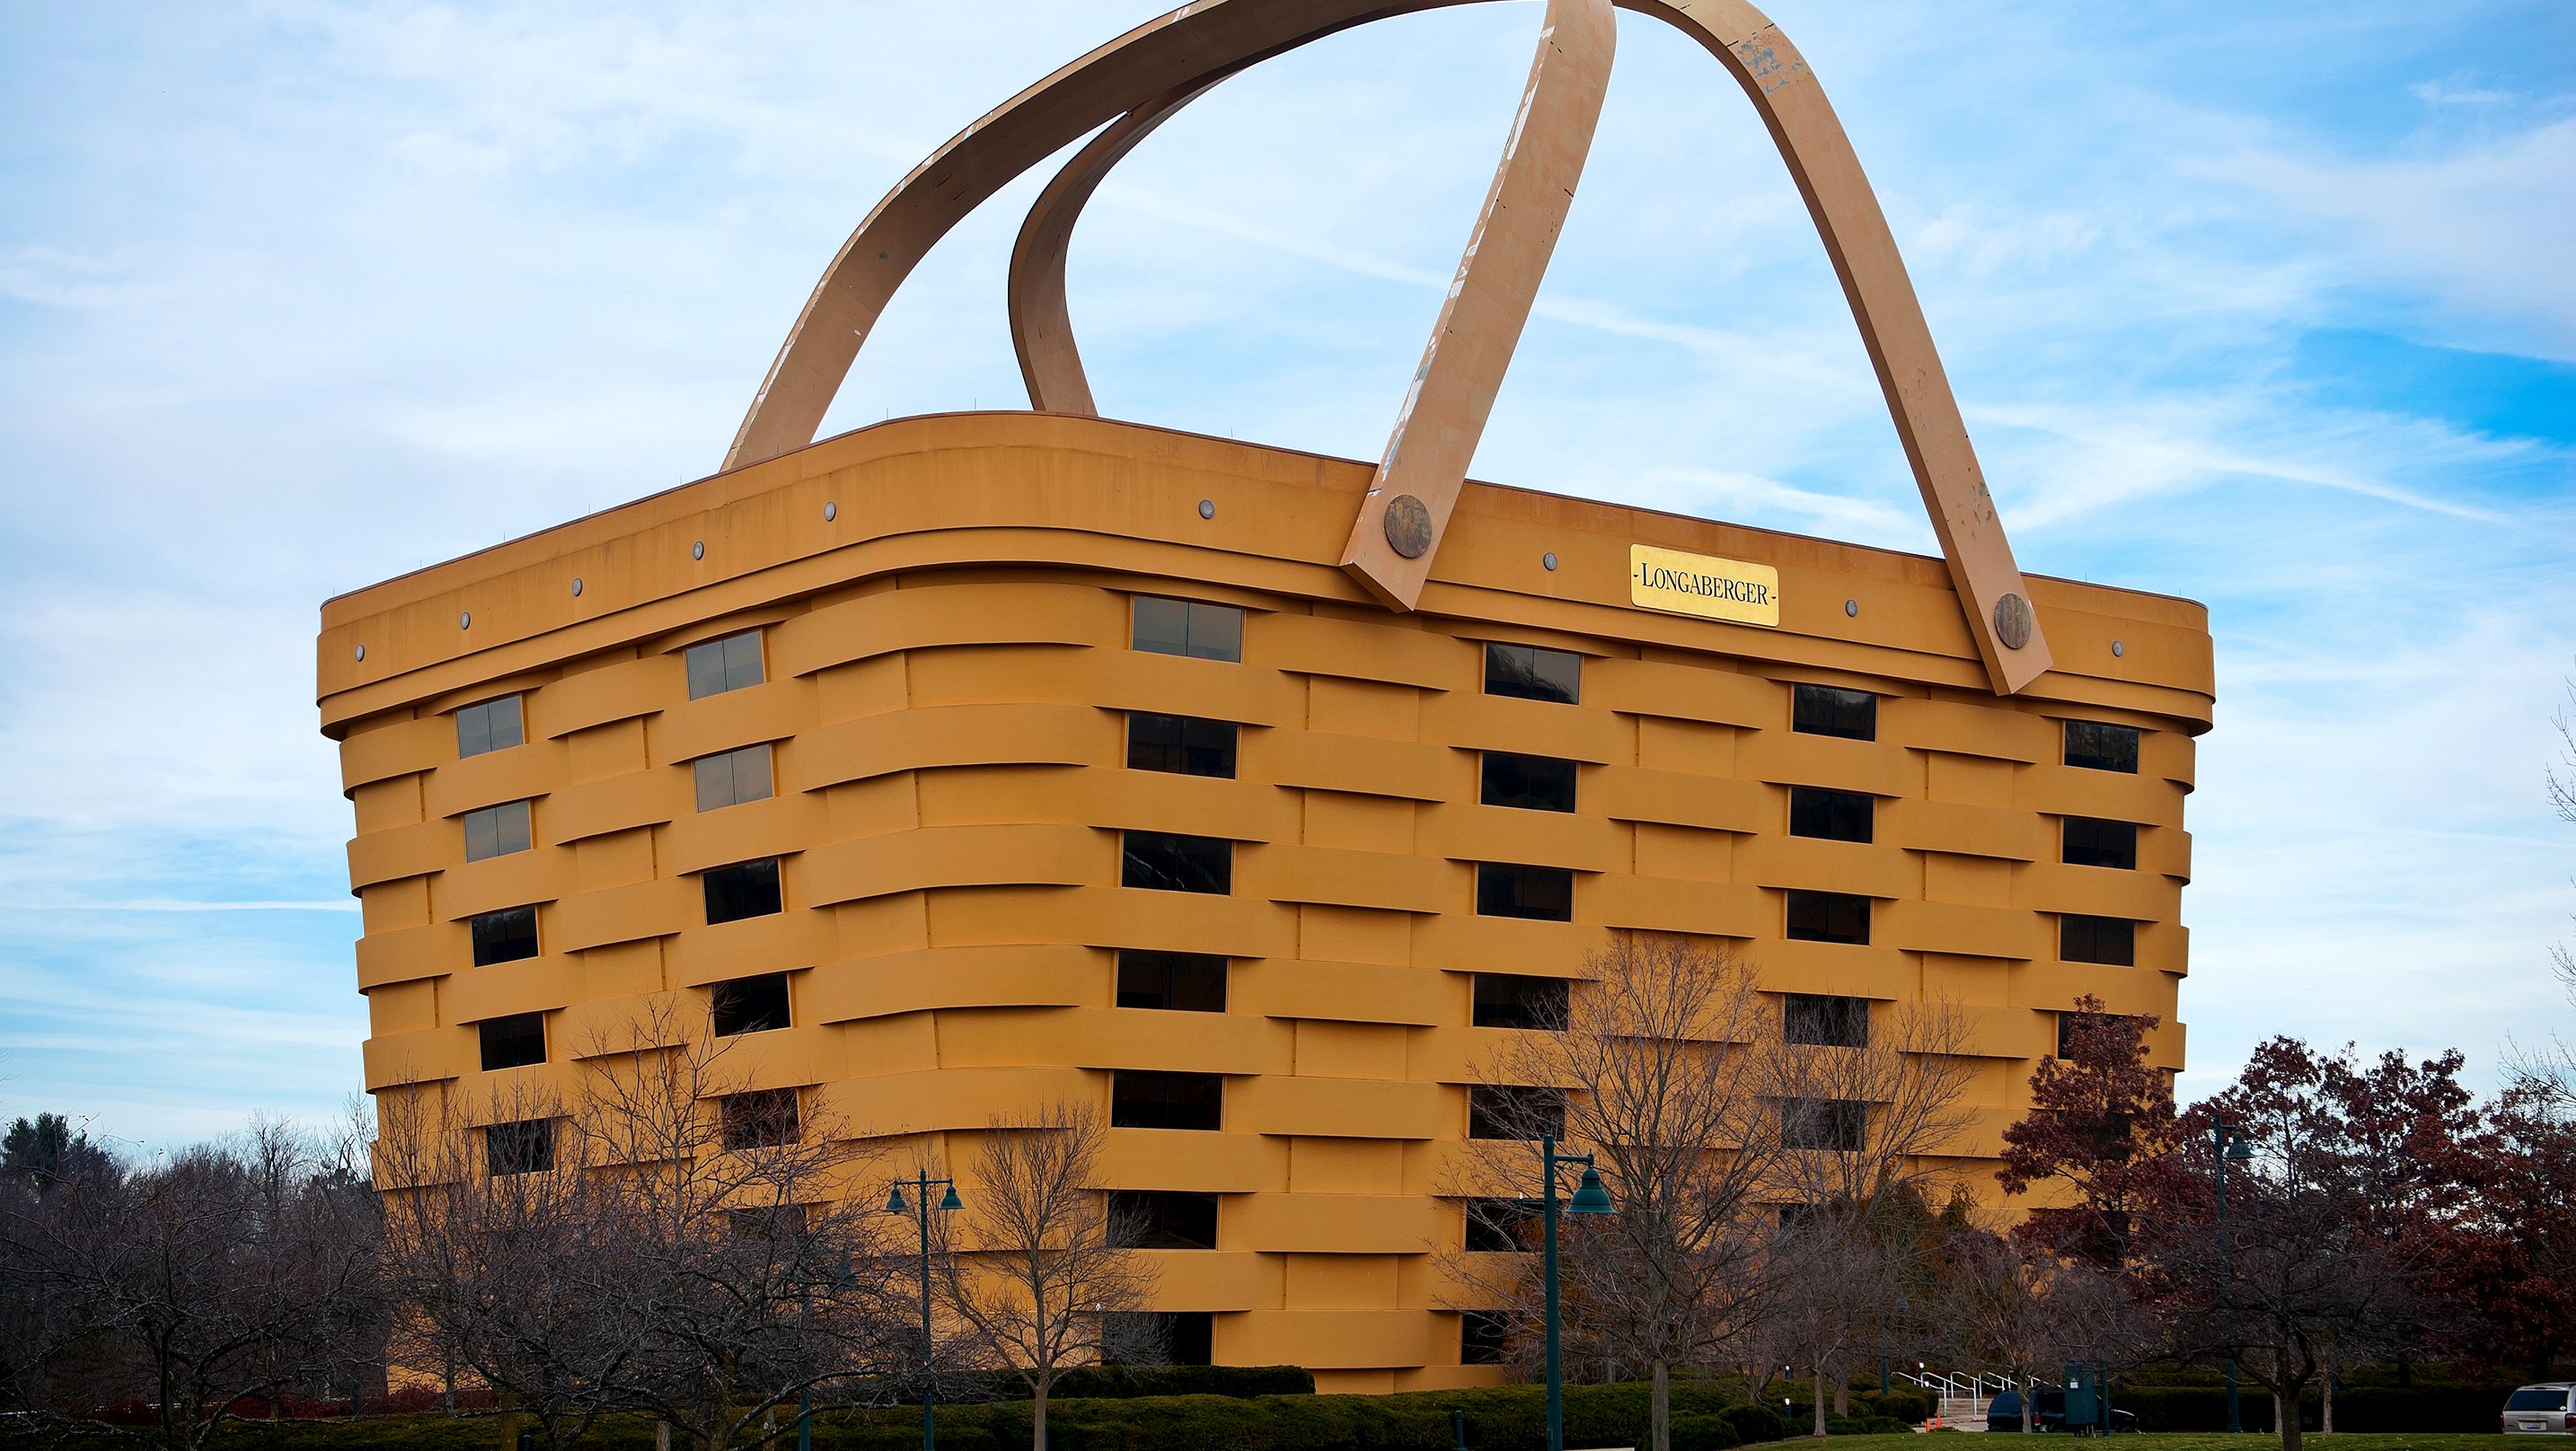 10 Buildings Shaped Like What They Sell | Mental Floss